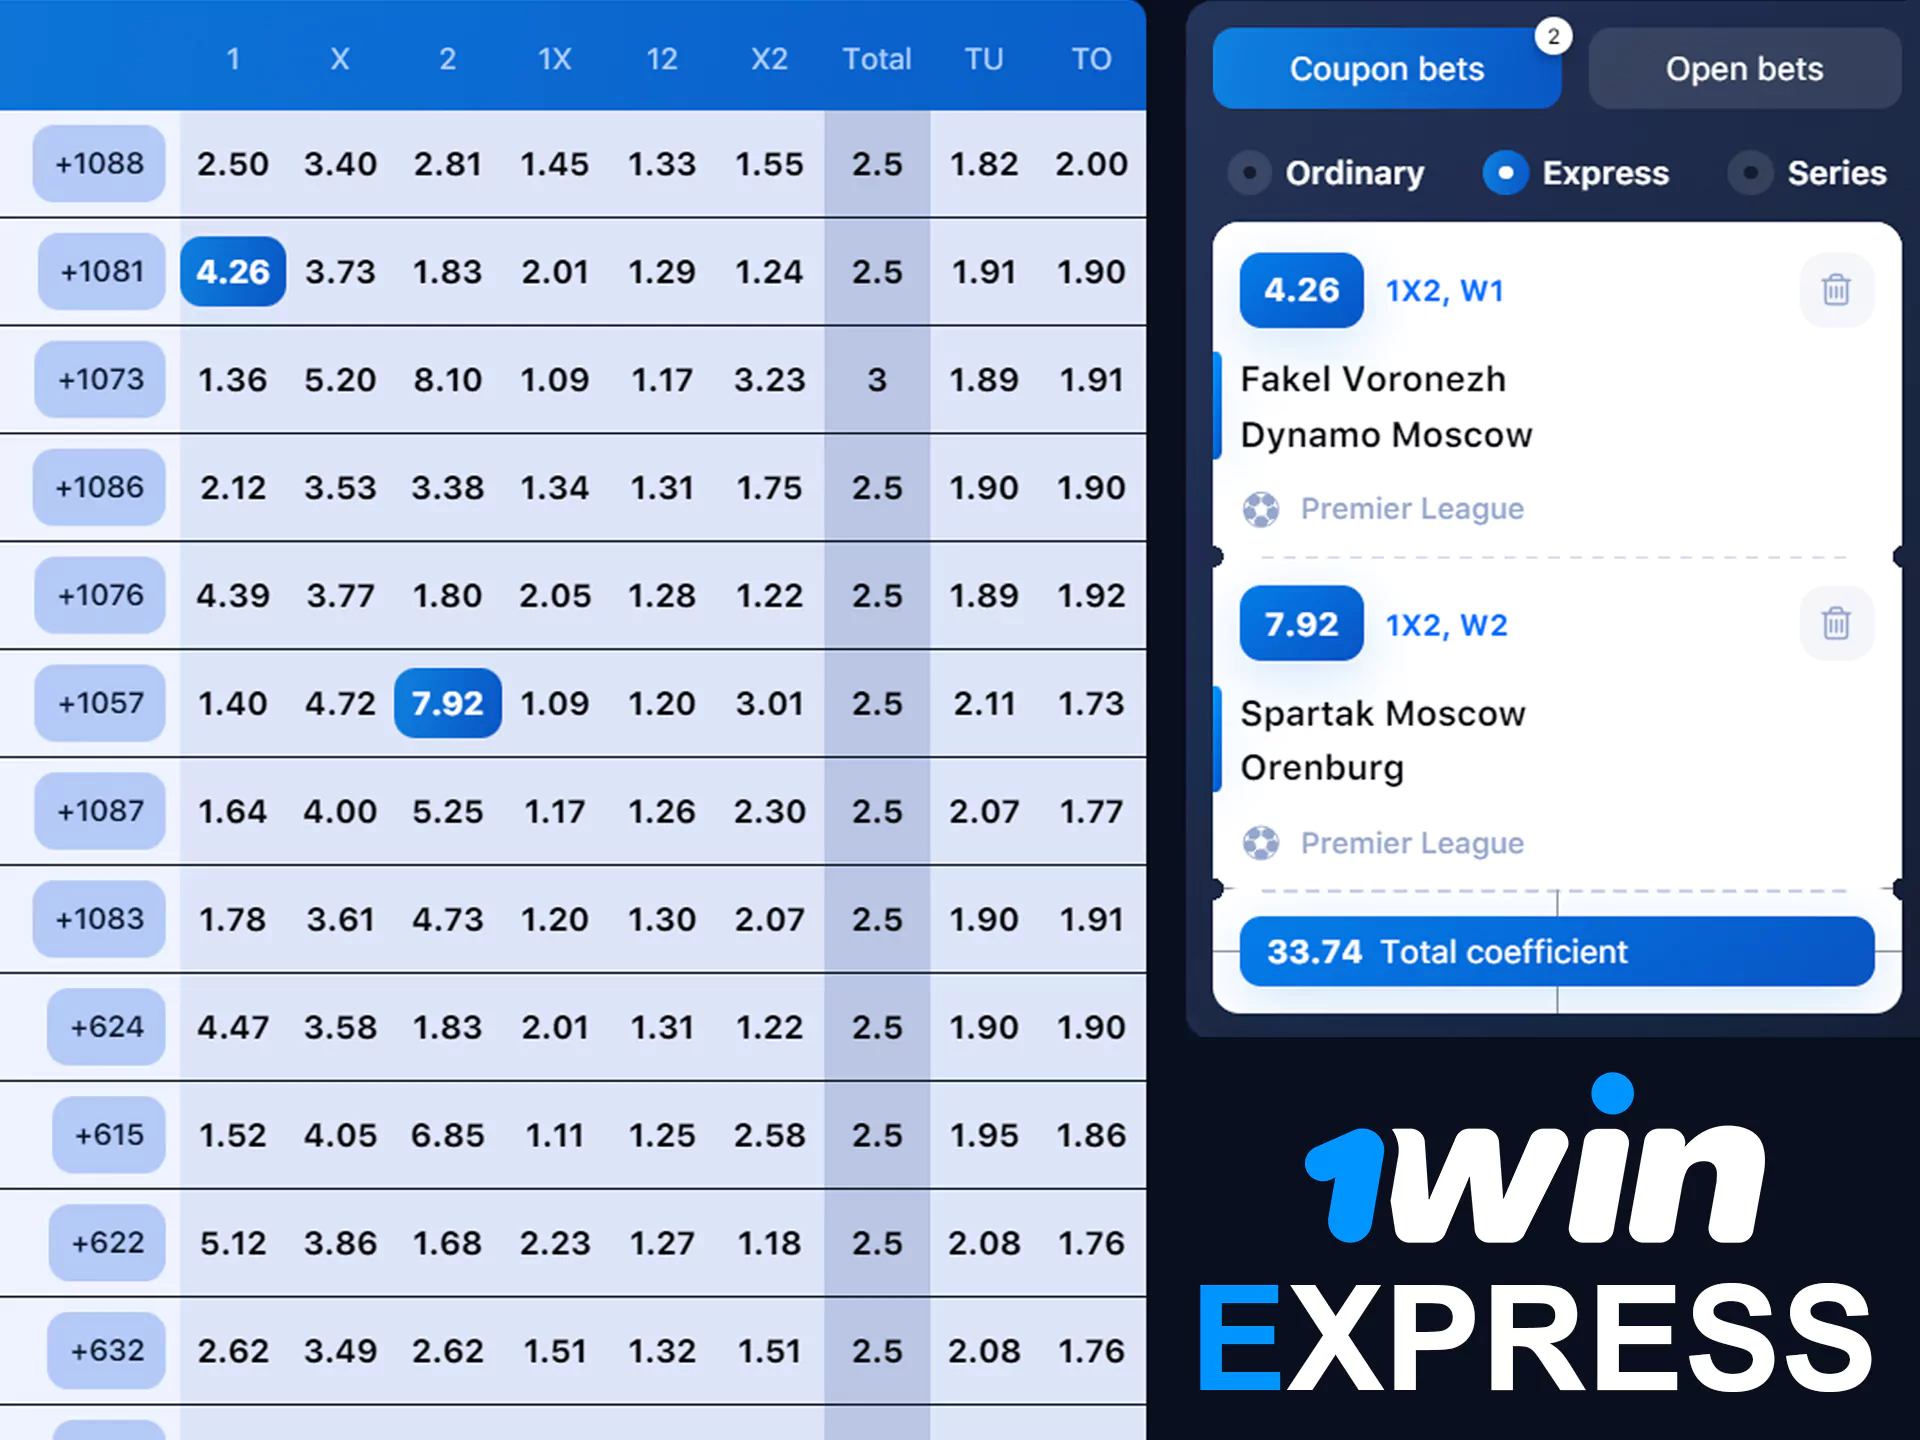 Win big prizes with express-type betting.